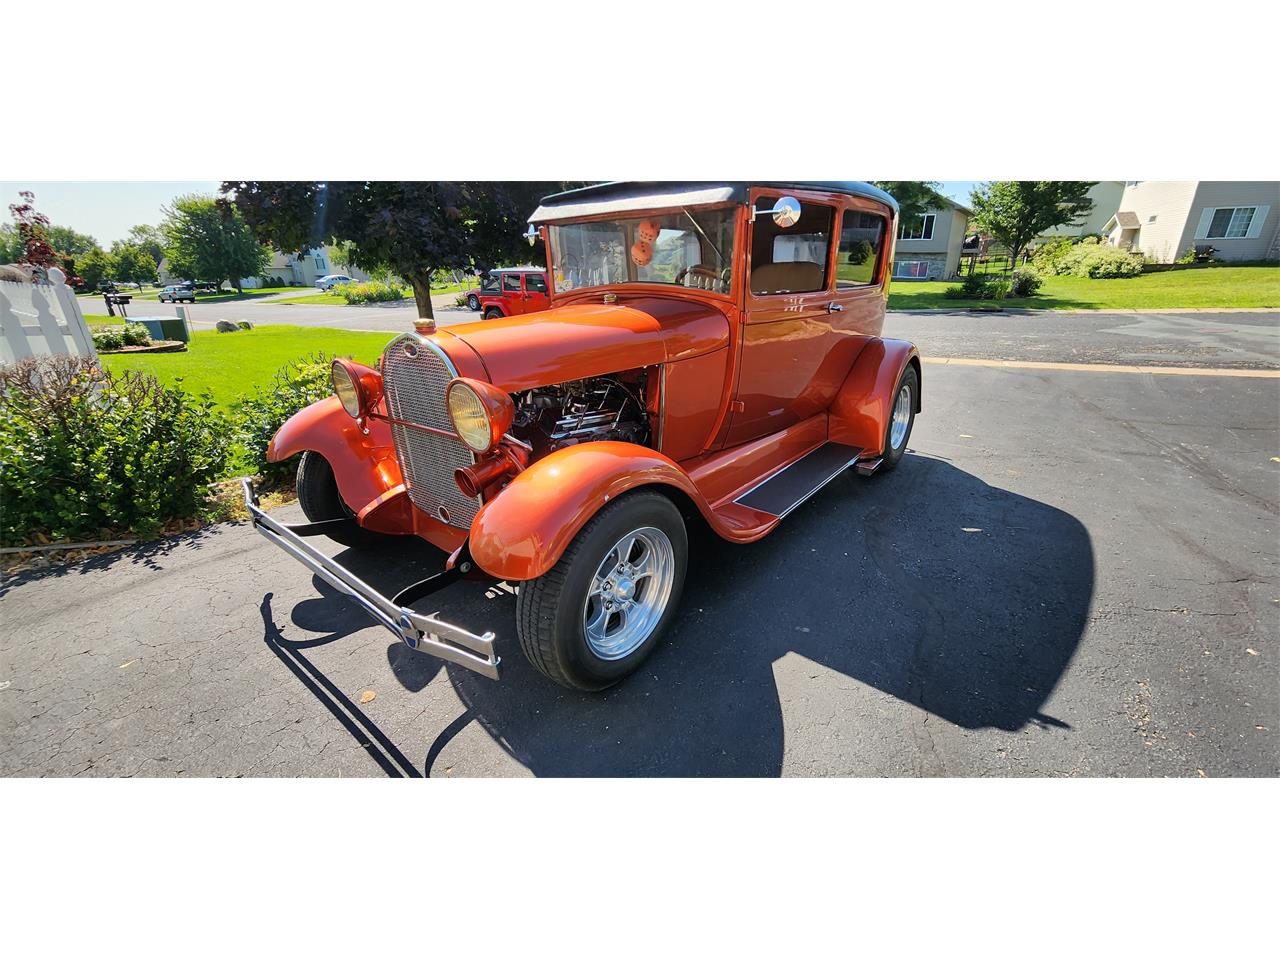 For Sale: 1929 Ford Model A in Belle Plaine, Minnesota, Minnesota for sale in Belle Plaine, MN